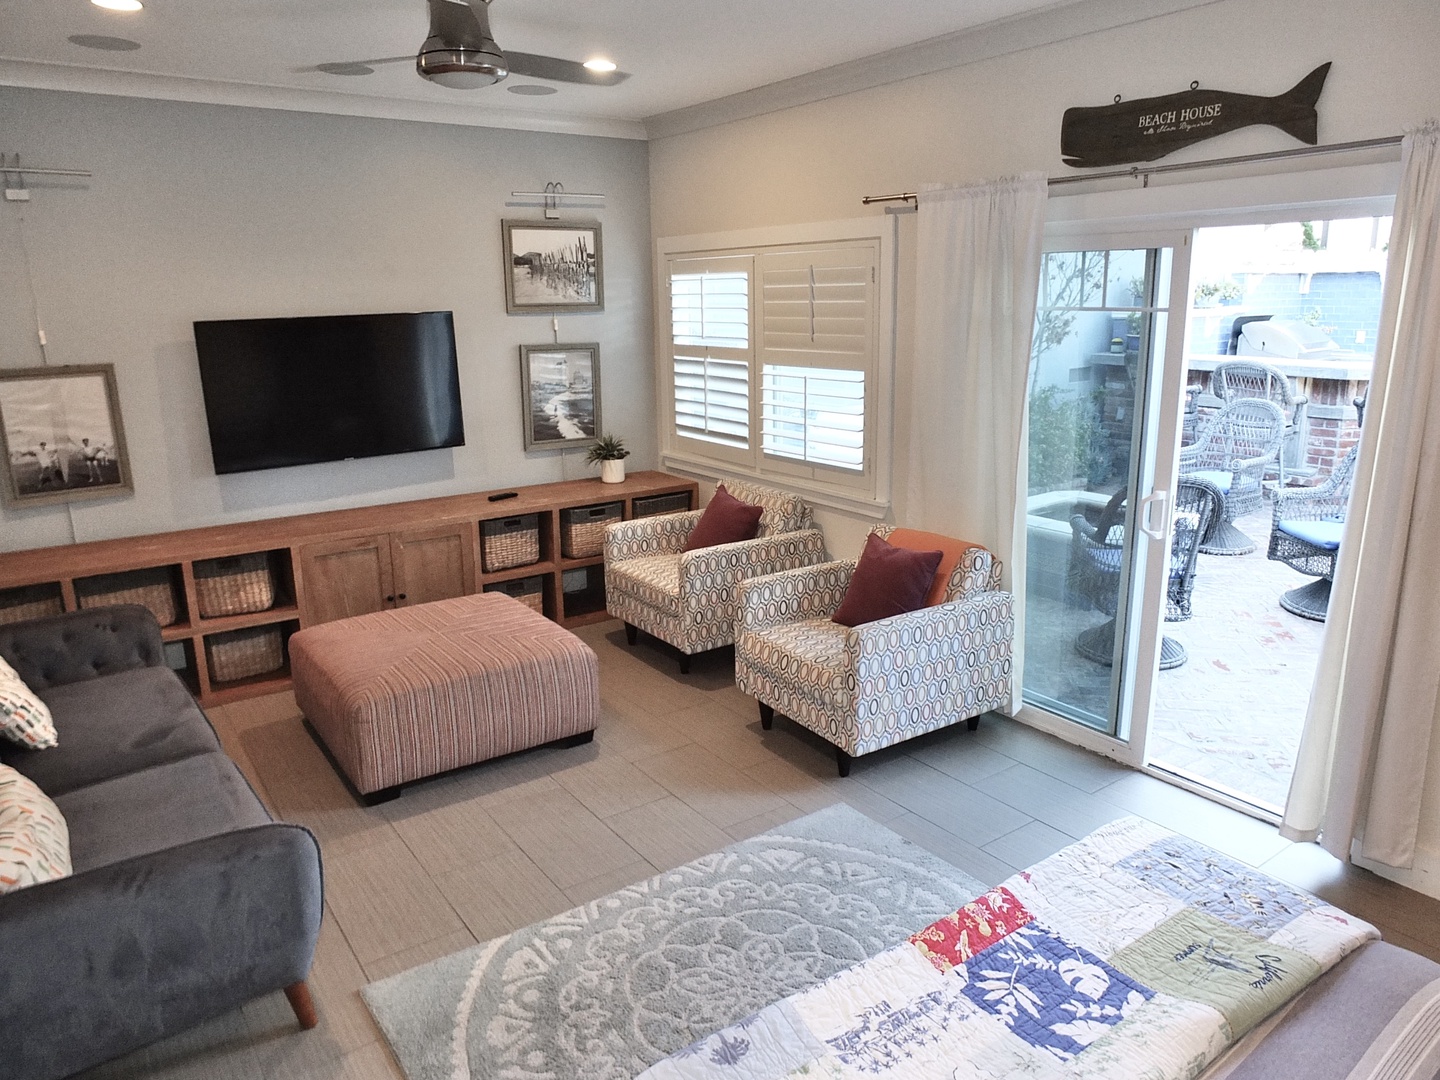 The casita provides a full-sized murphy bed, living area & smart tv